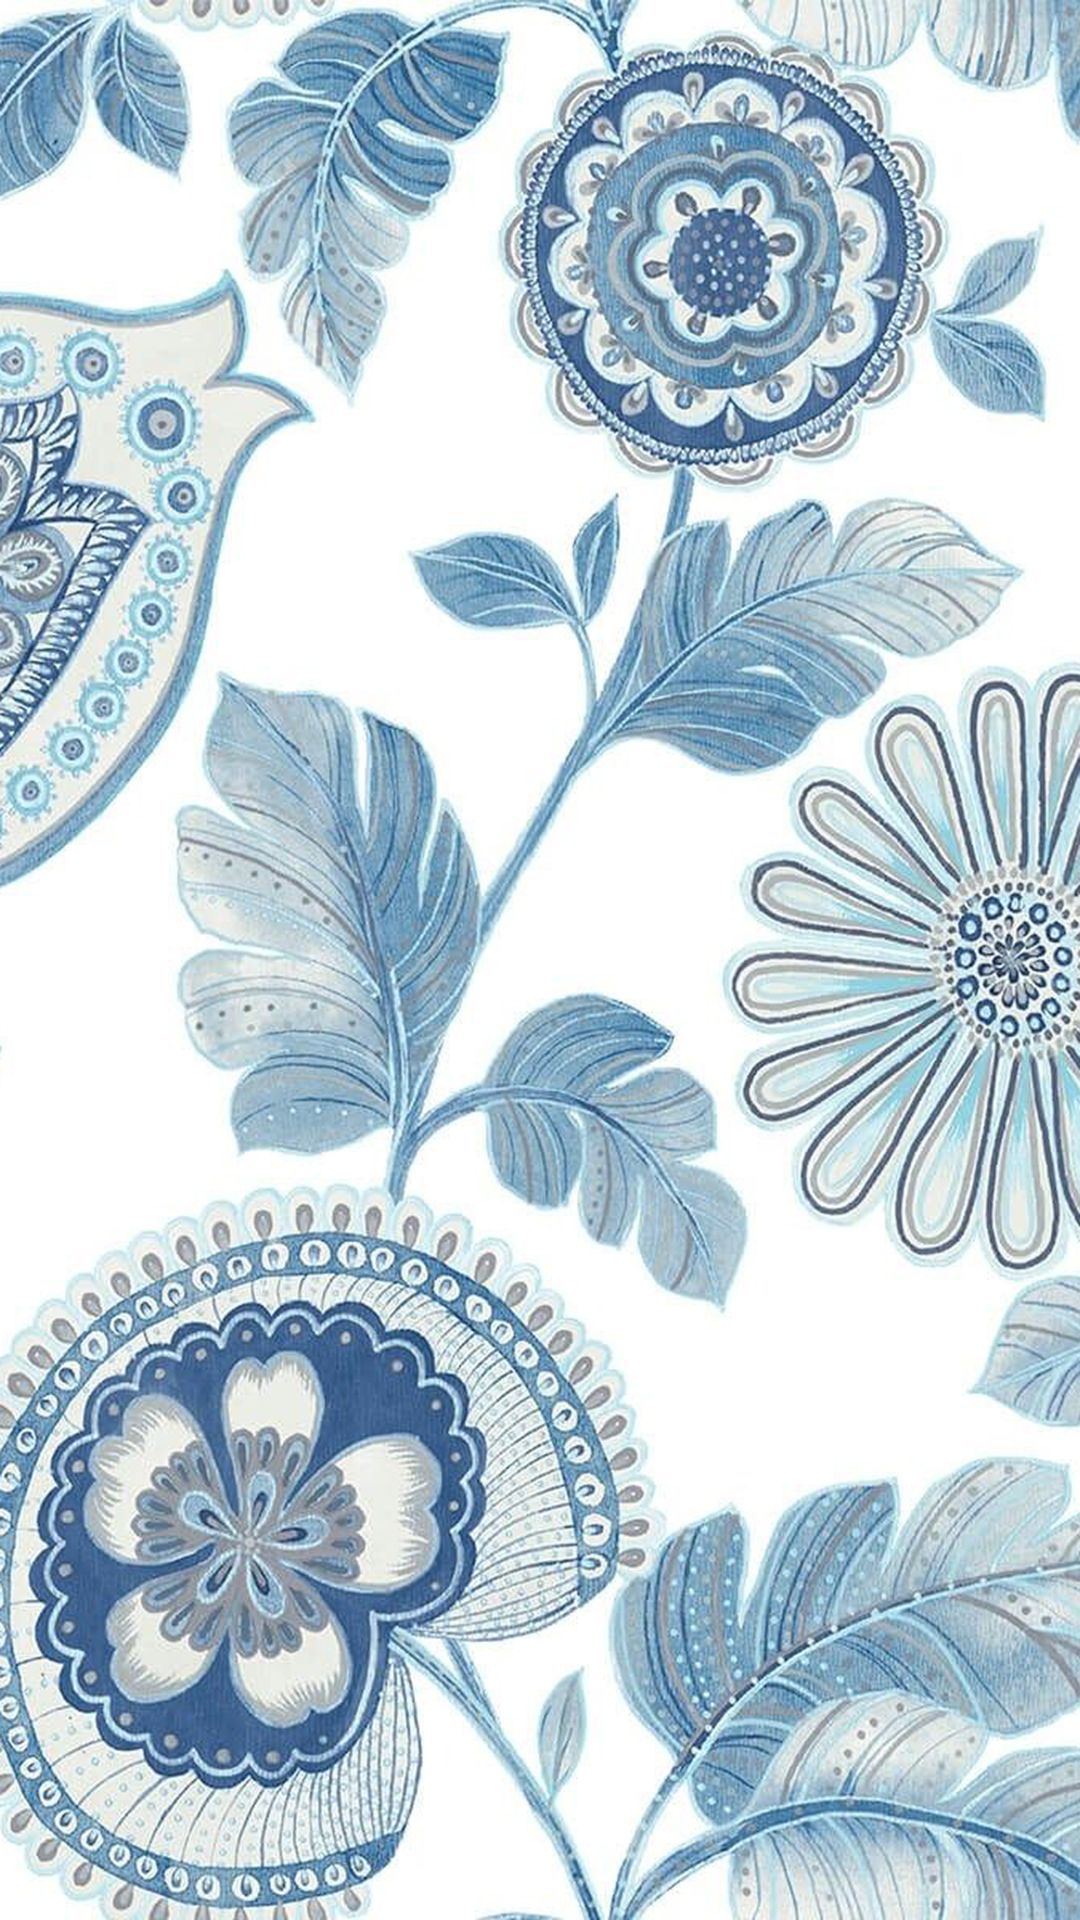 Blue and white floral wallpaper with a paisley design - Boho